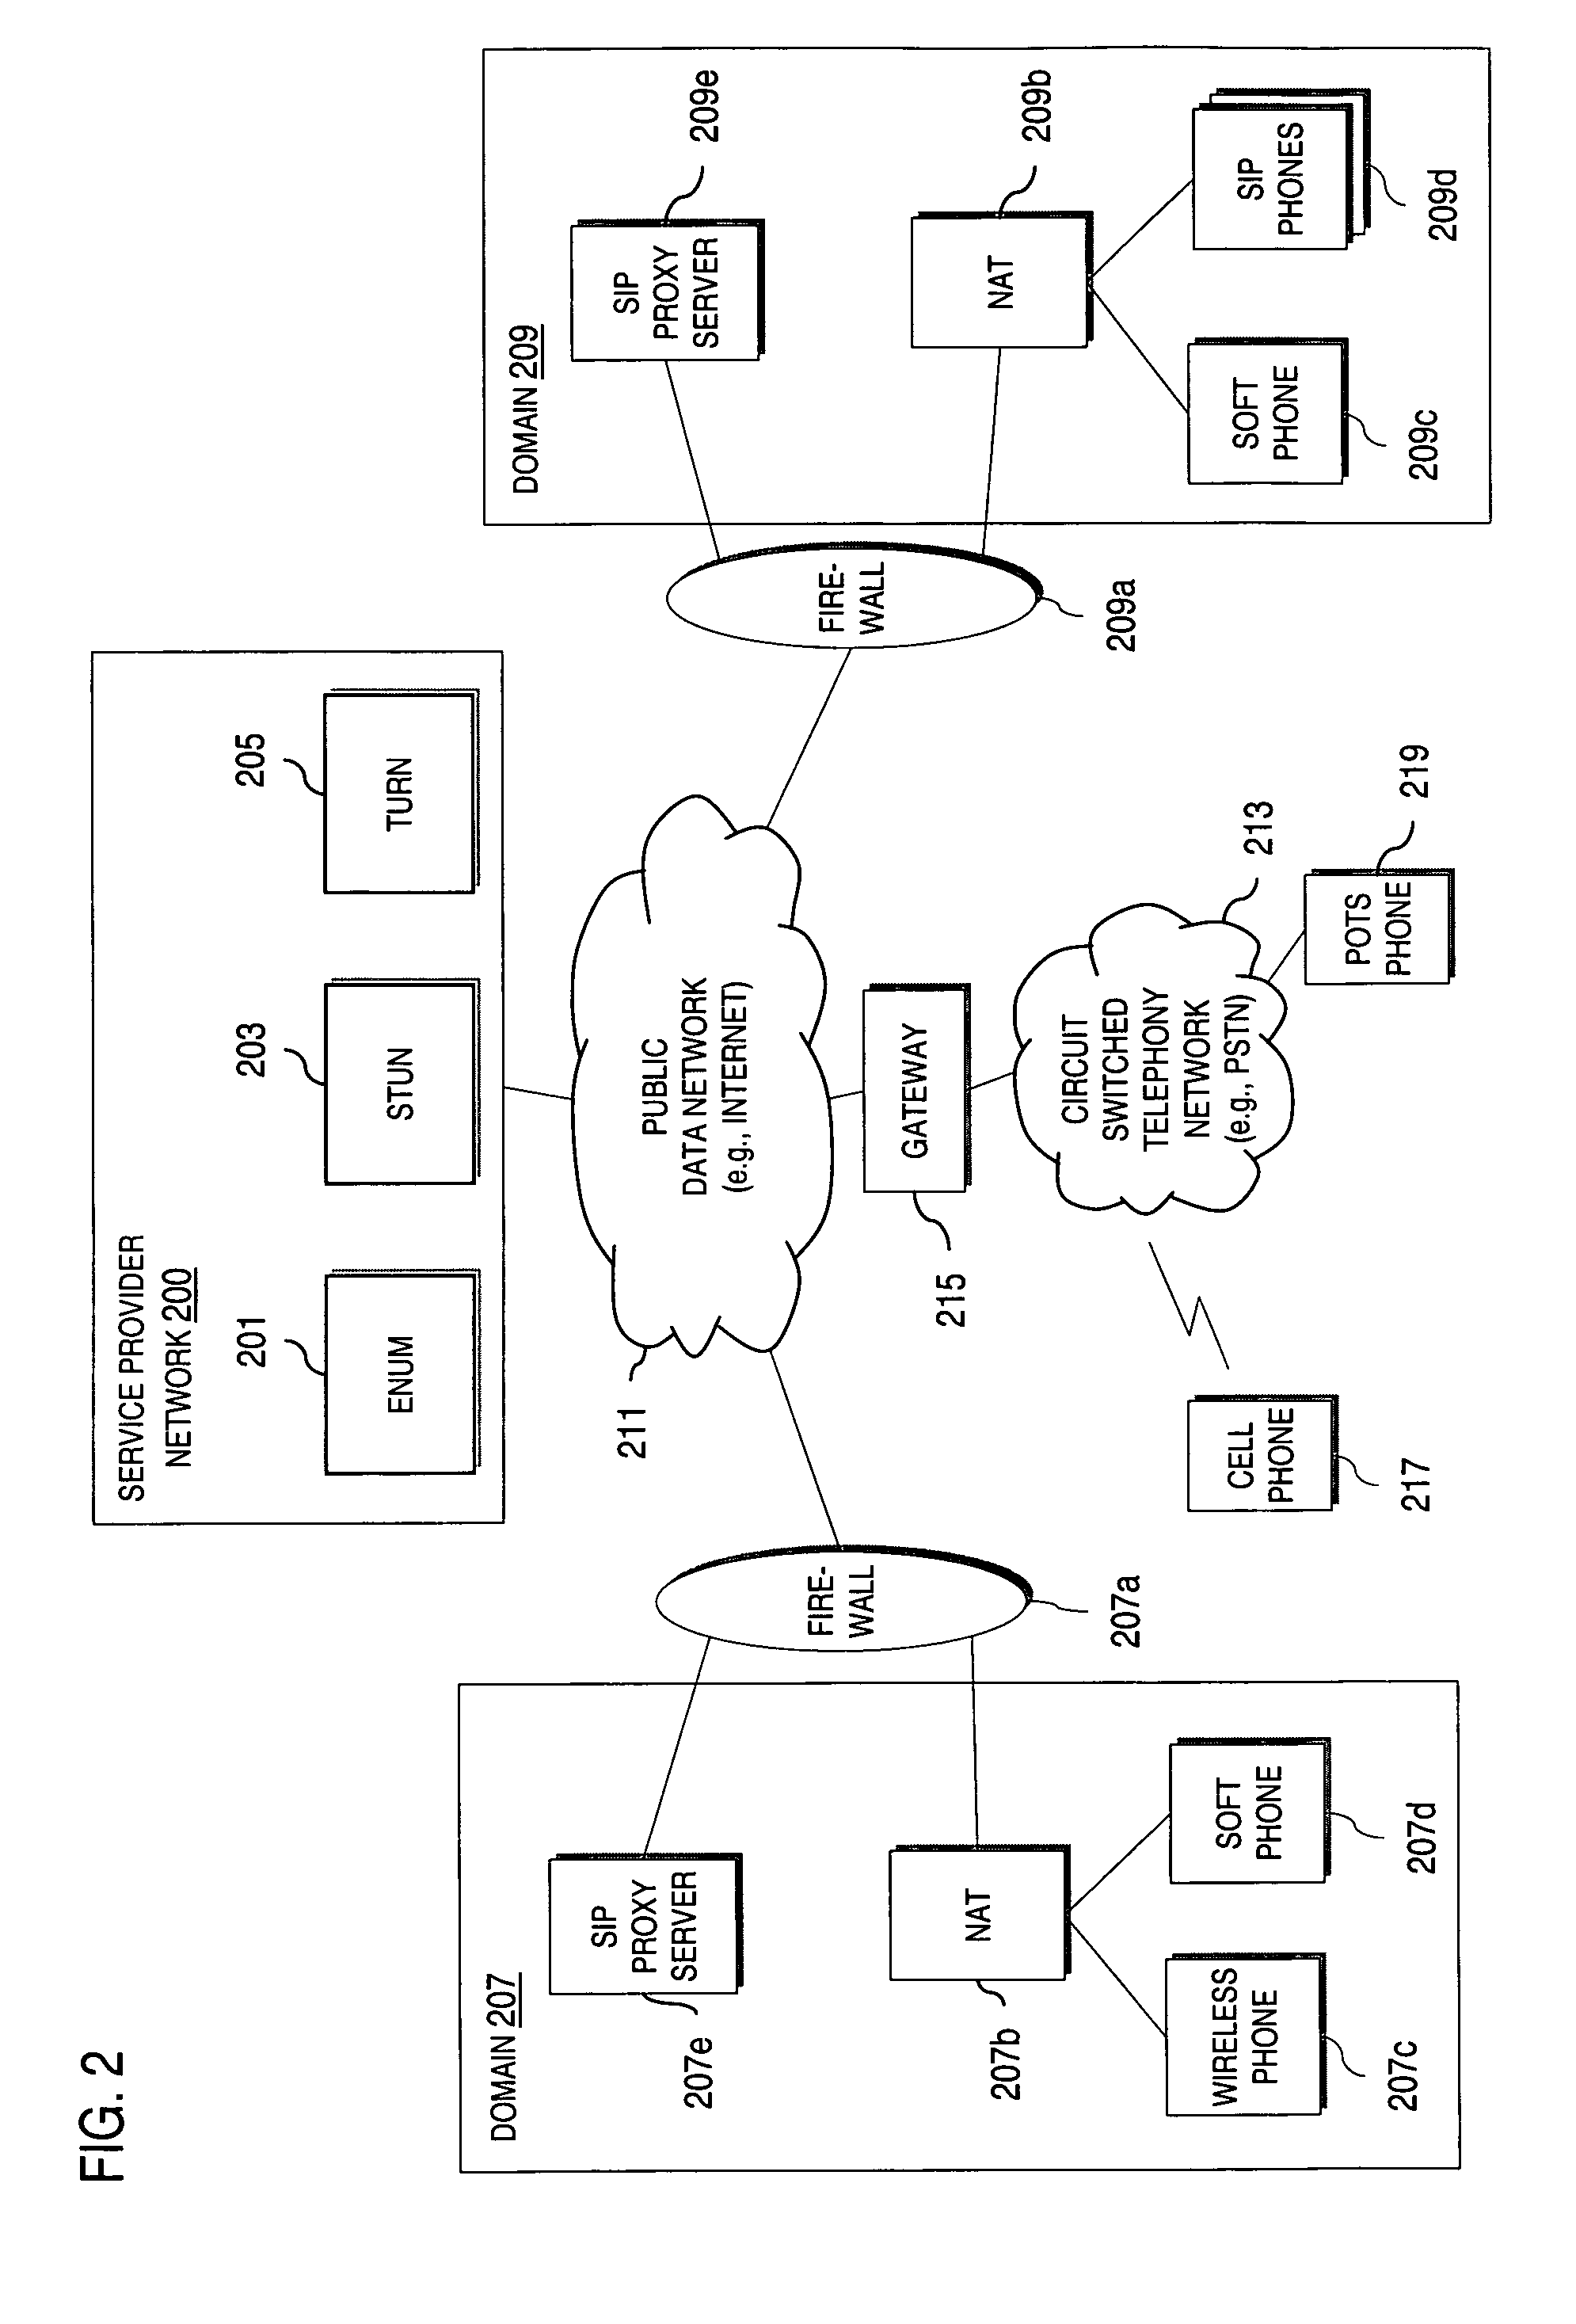 Method and system for providing interdomain traversal in support of packetized voice transmissions